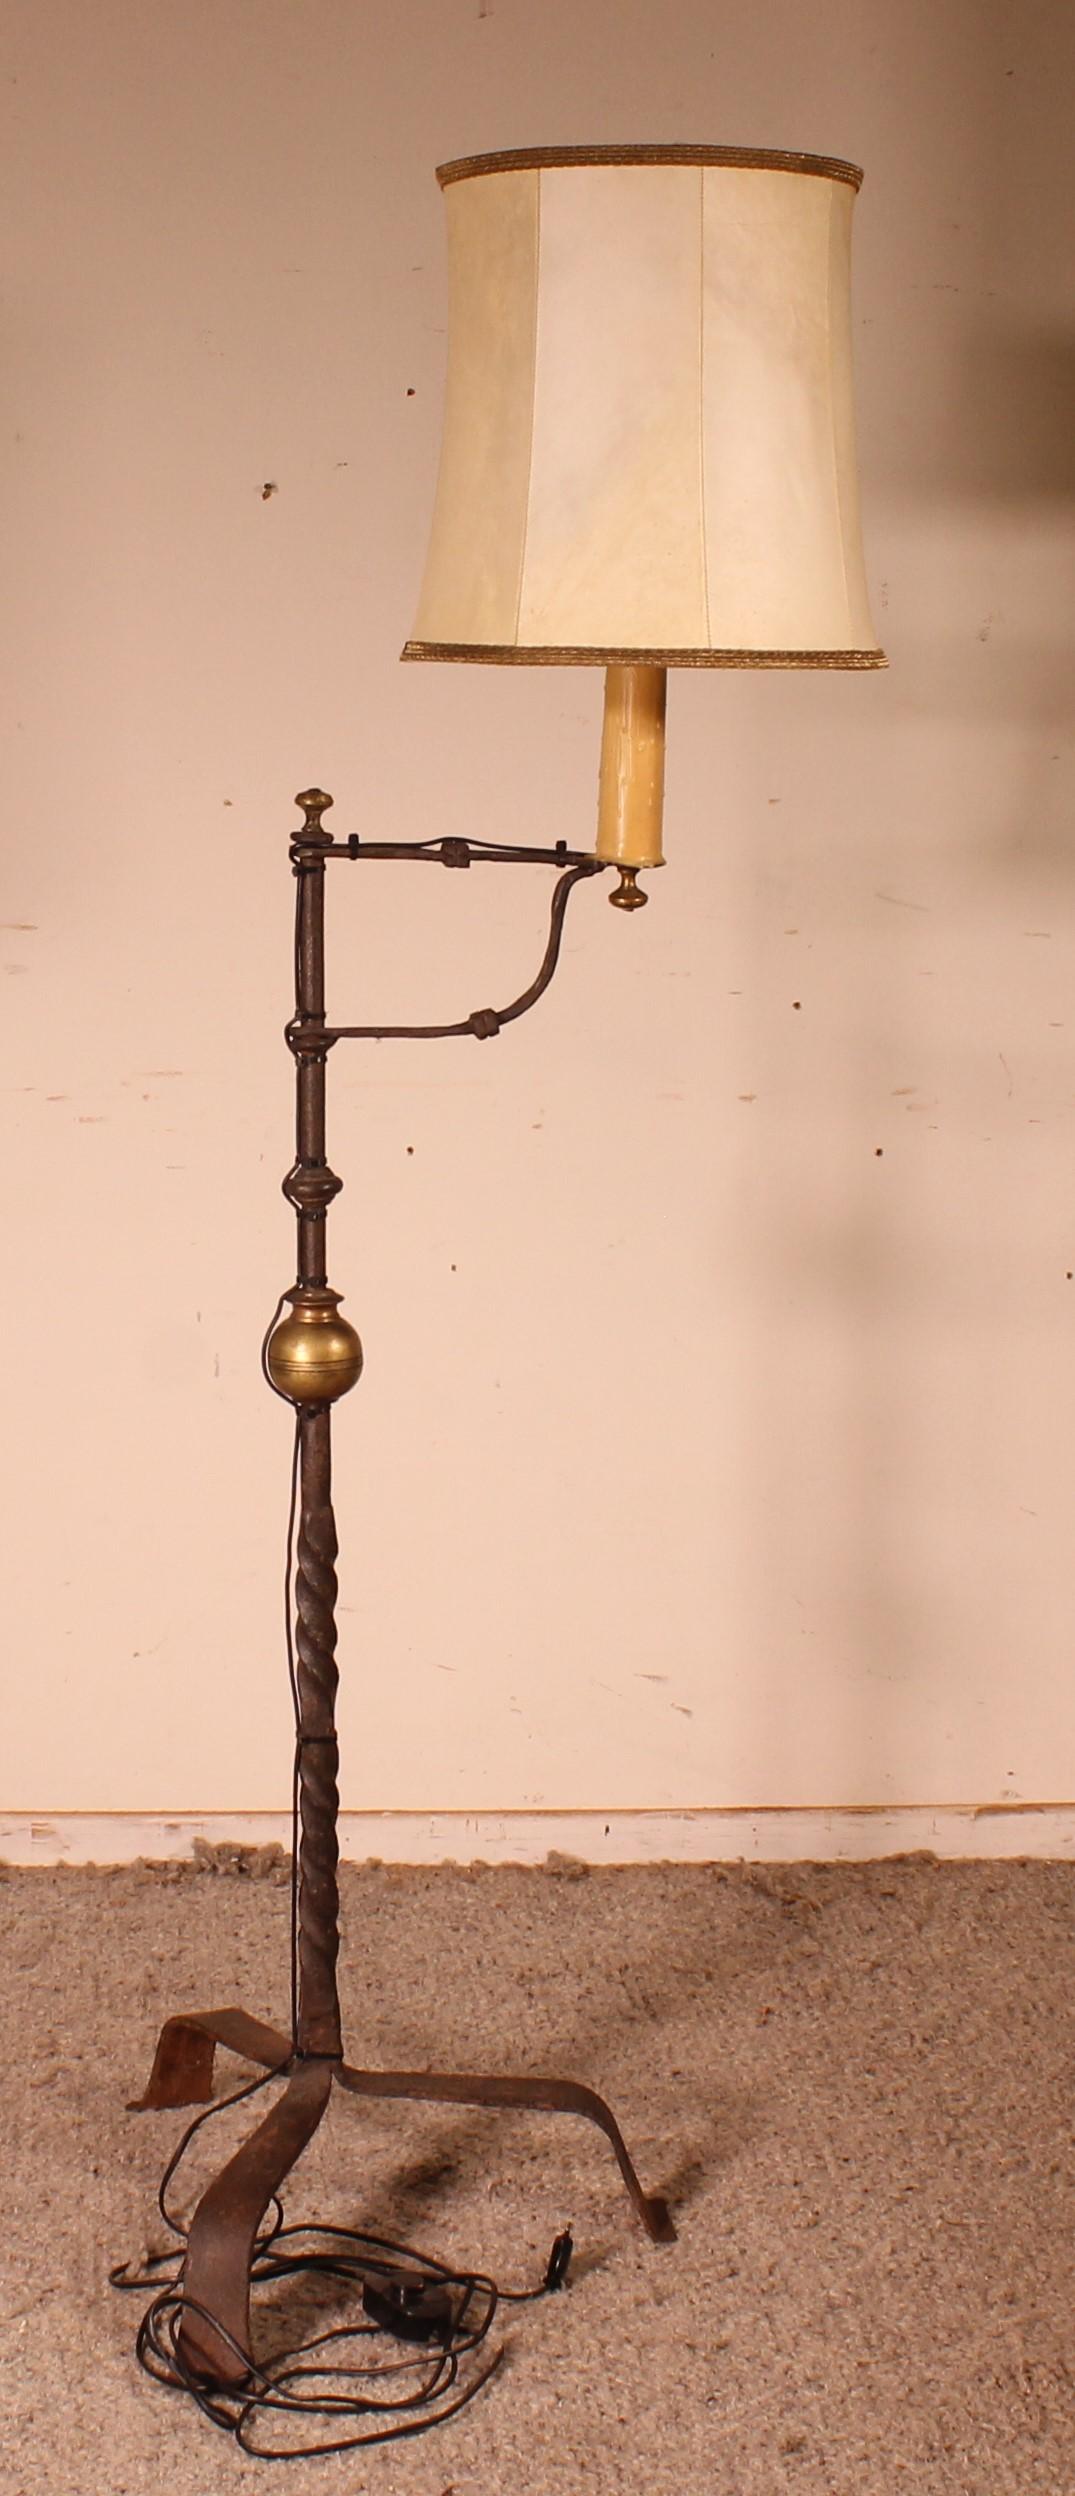 19th Century Wrought Iron Candle Holder with Goatskin Lampshade For Sale